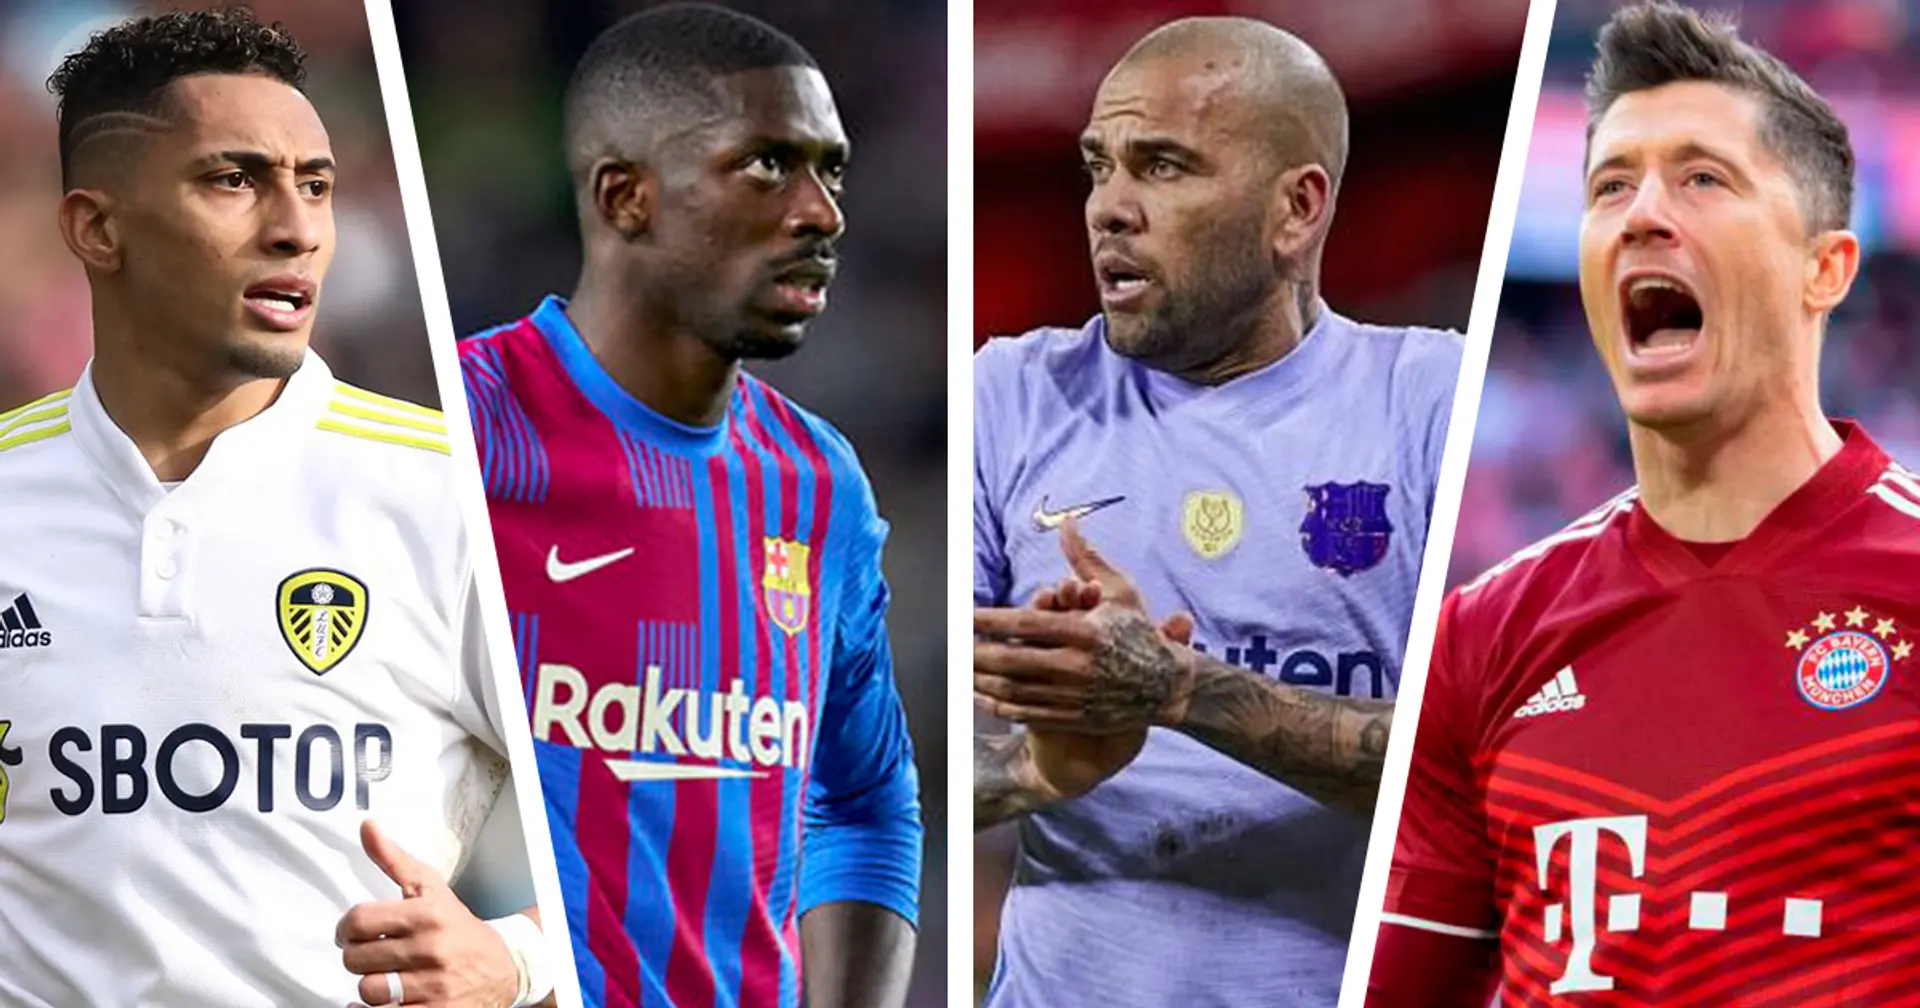 3 players signed, 2+ more to come: rating latest transfer rumours from 1 to 10